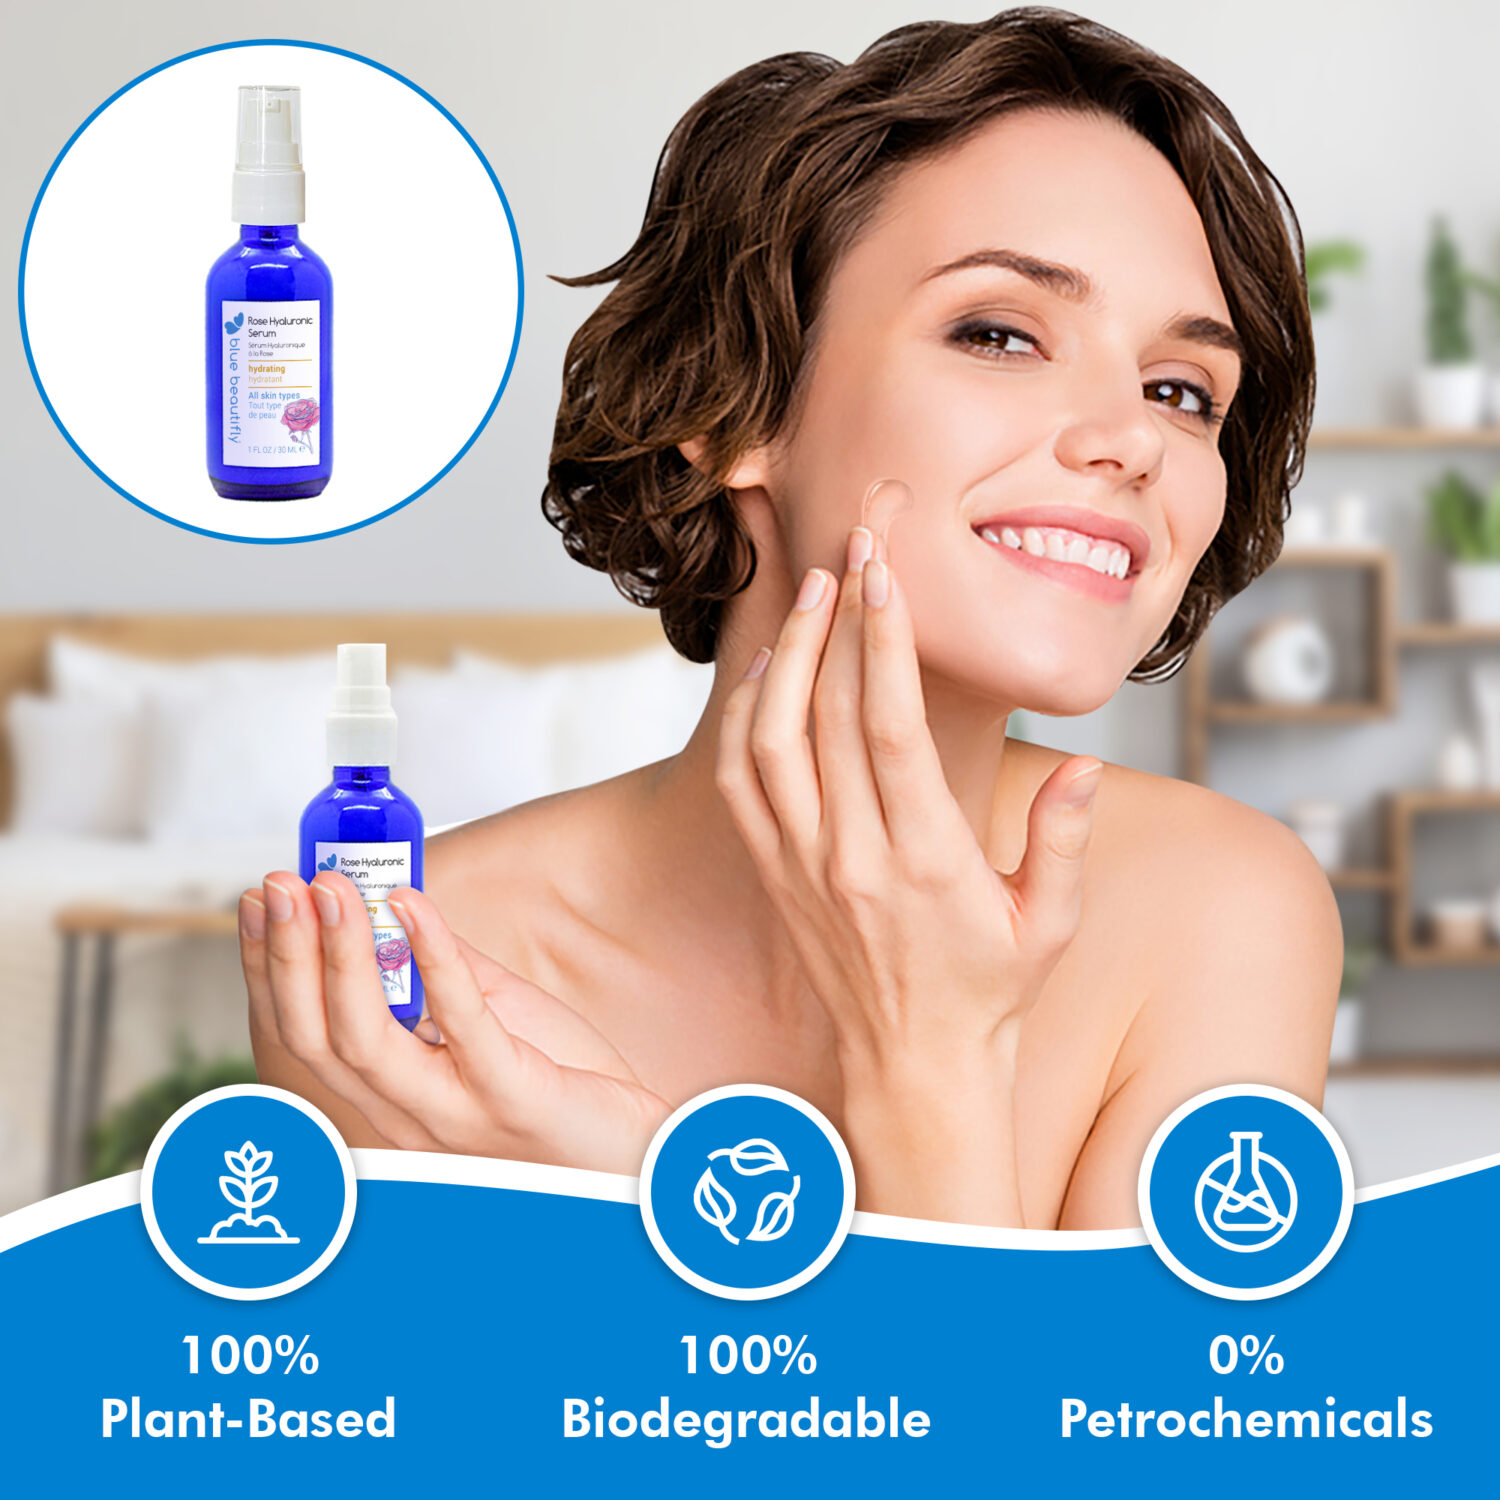 Blue Beautifly Rose Hyaluronic Serum is 100% plant-based and biodegradable and contains no petrochemicals or toxins